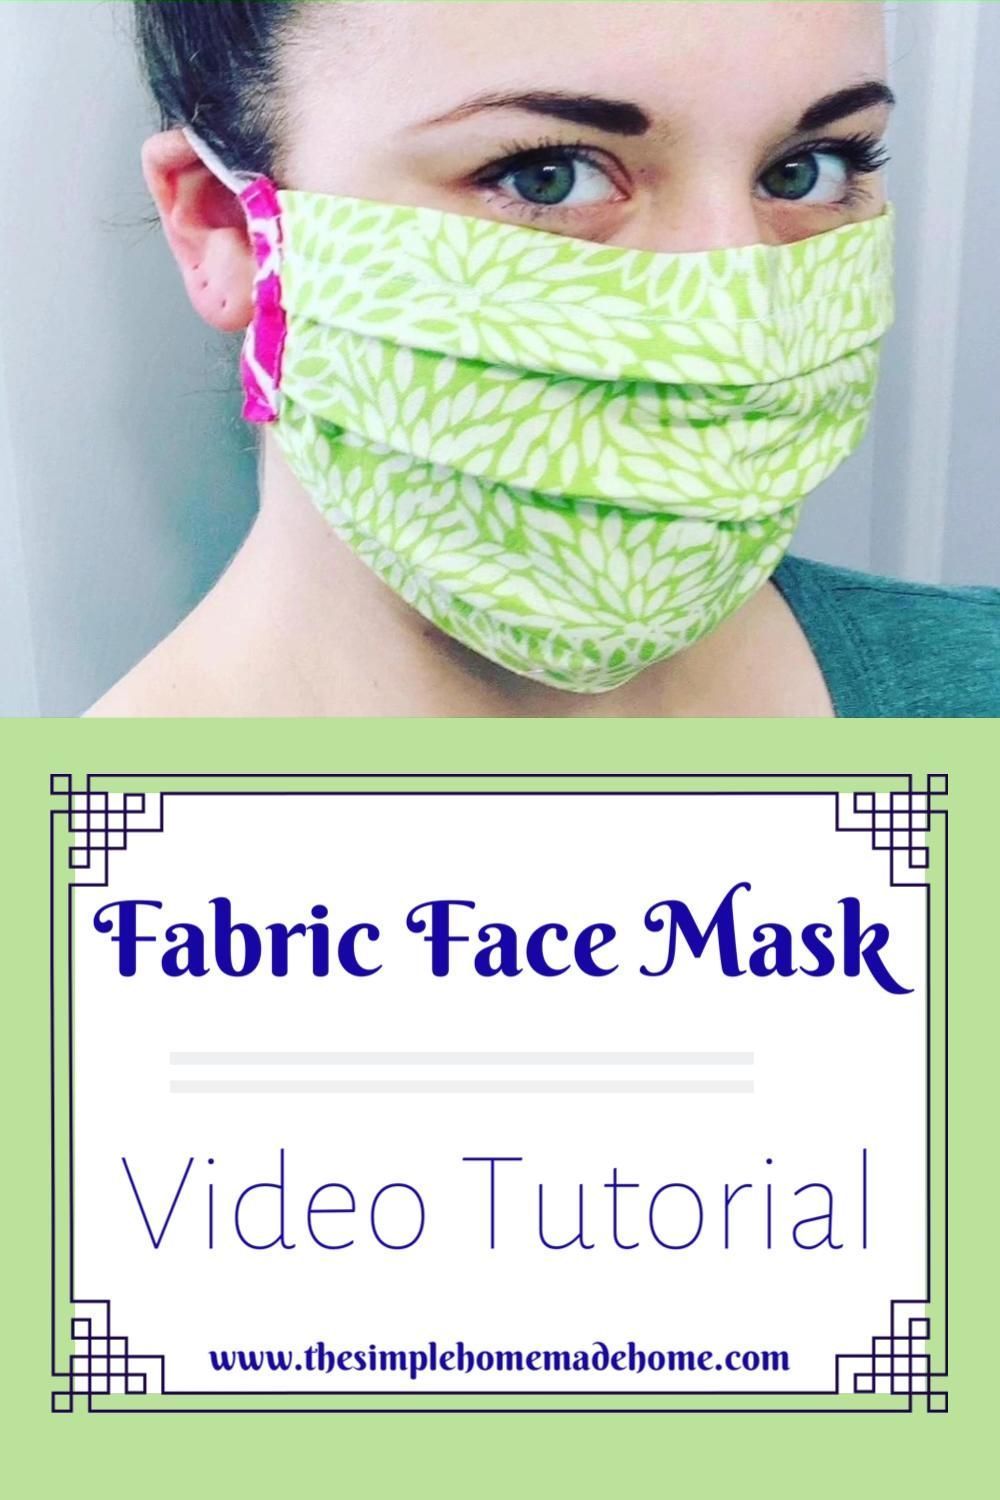 Fabric Face Mask: Sewing Tutorial - The Simple Homemade Home -   23 fabric crafts Videos tutorials ideas